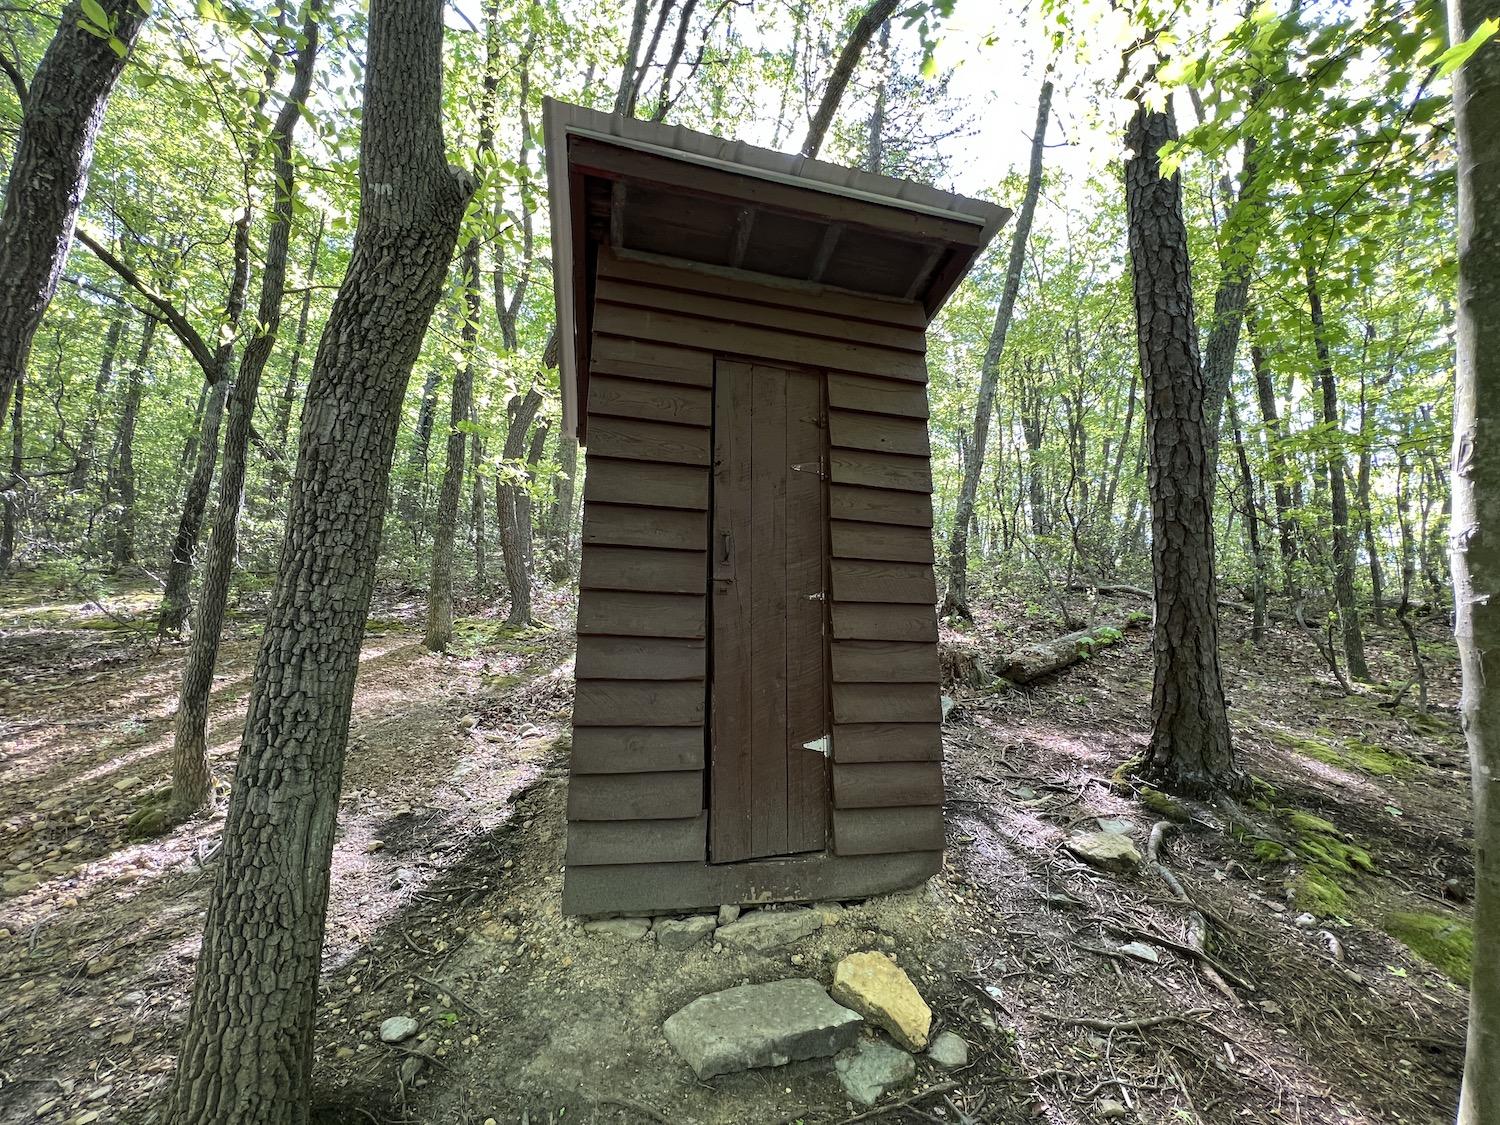 A single toilet can be found along the Appalachian Trail side of the McAfee Knob route.